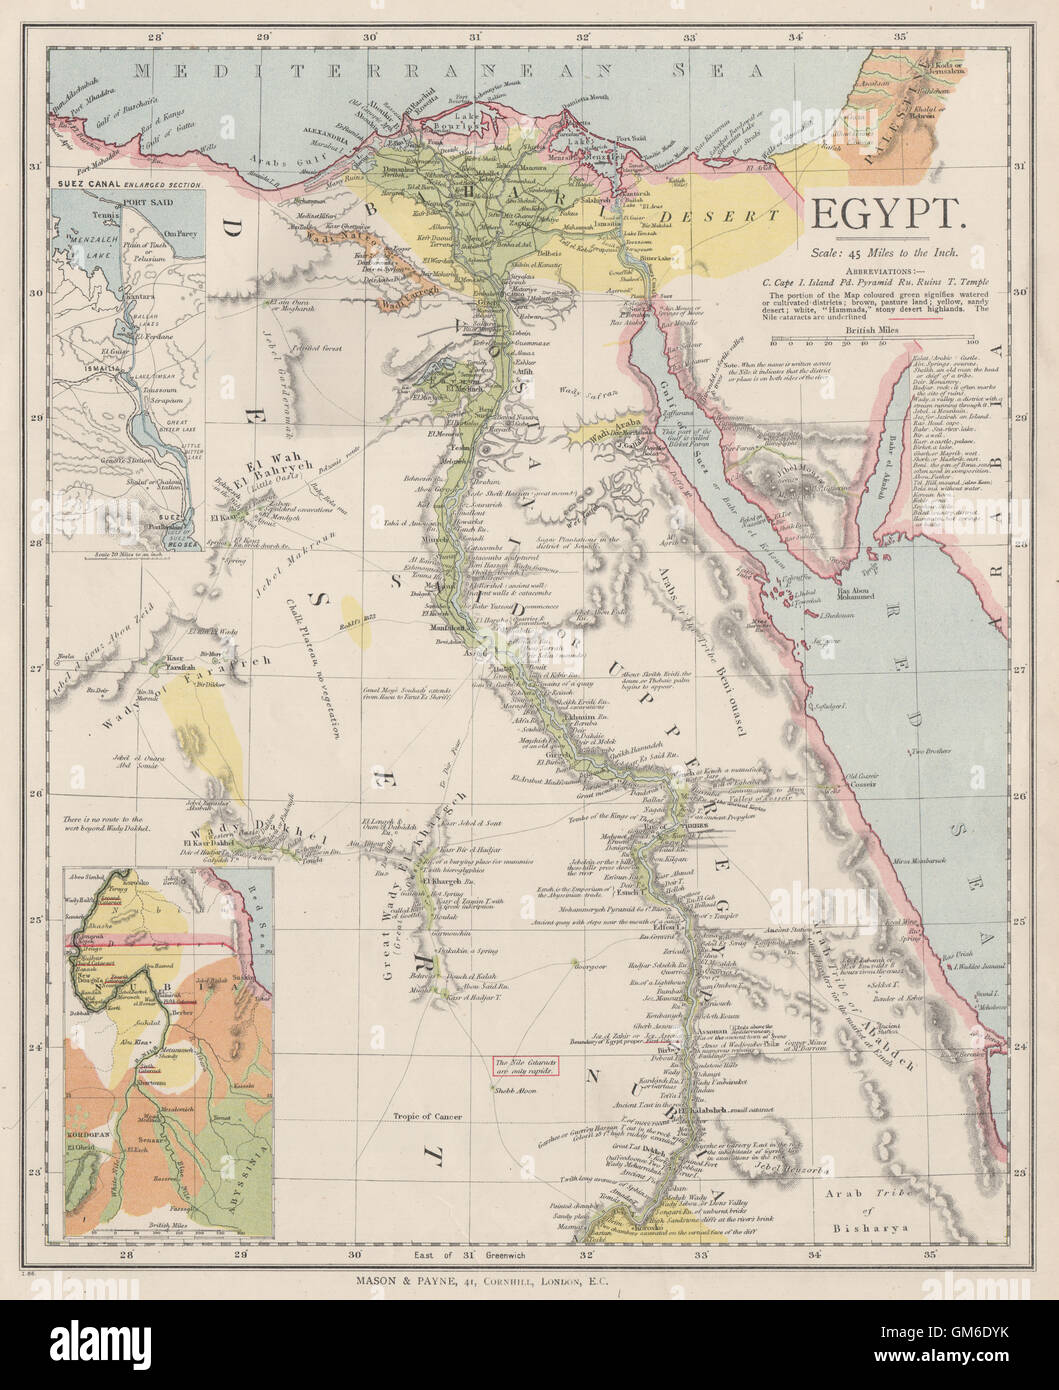 EGYPT. Nile valley. Suez Canal. Red Sea. 'Sherm'/Sharm el-Sheikh. LETTS 1889 map Stock Photo